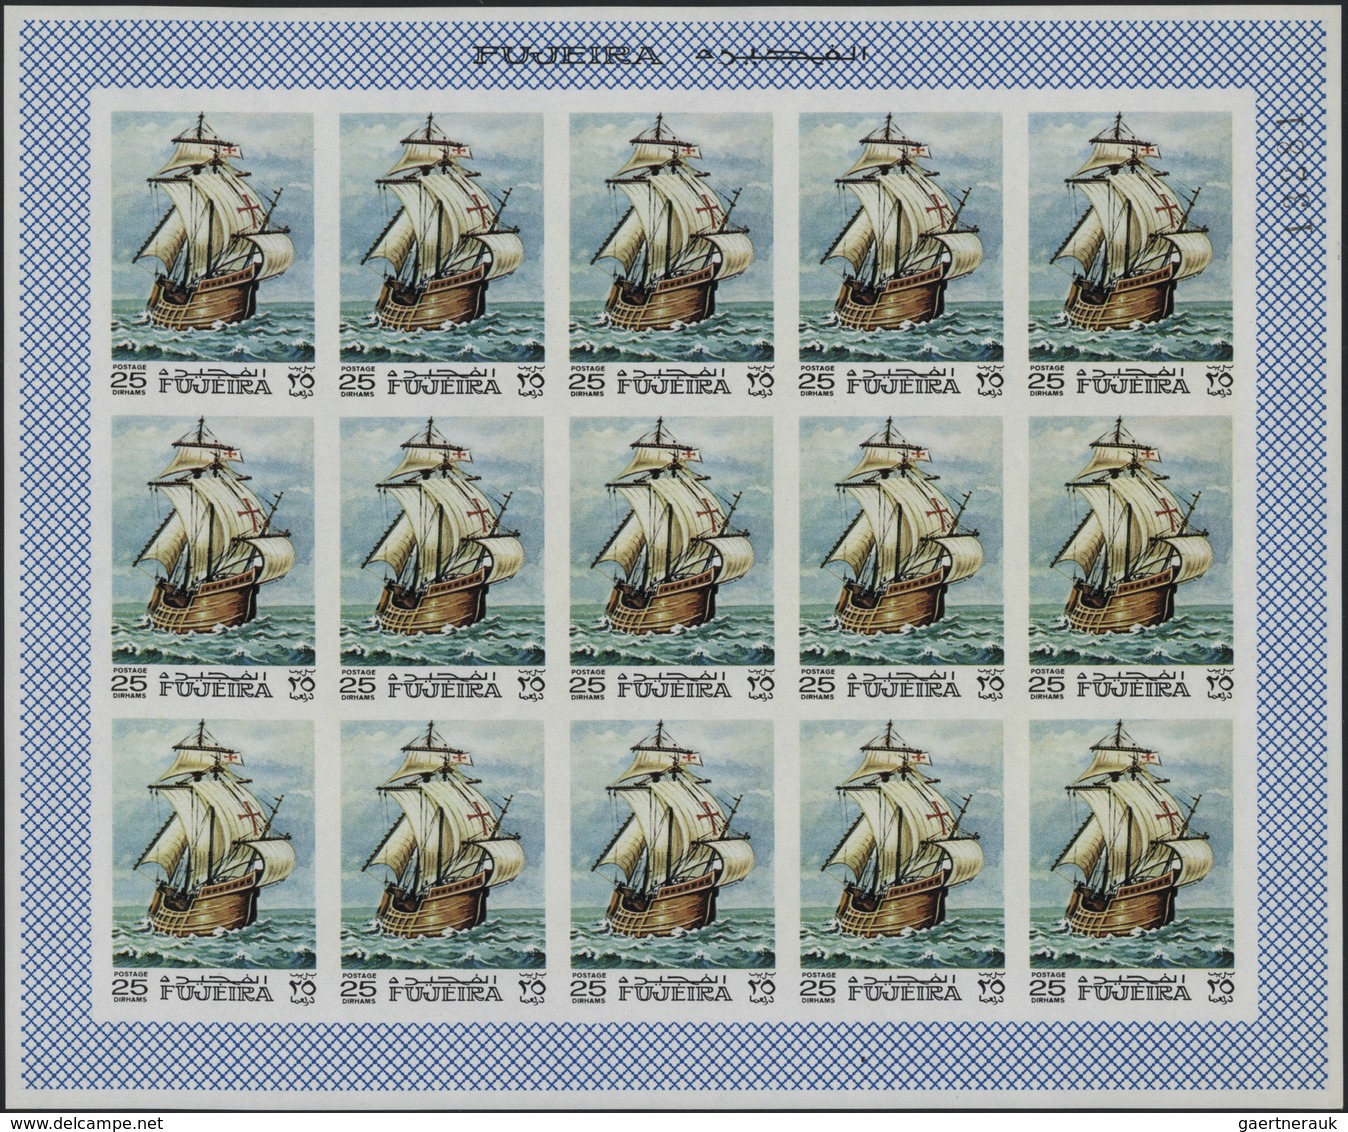 ** Fudschaira / Fujeira: 1968, Ships, imperforate issue, 15dh. to 5r., complete set of nine values each